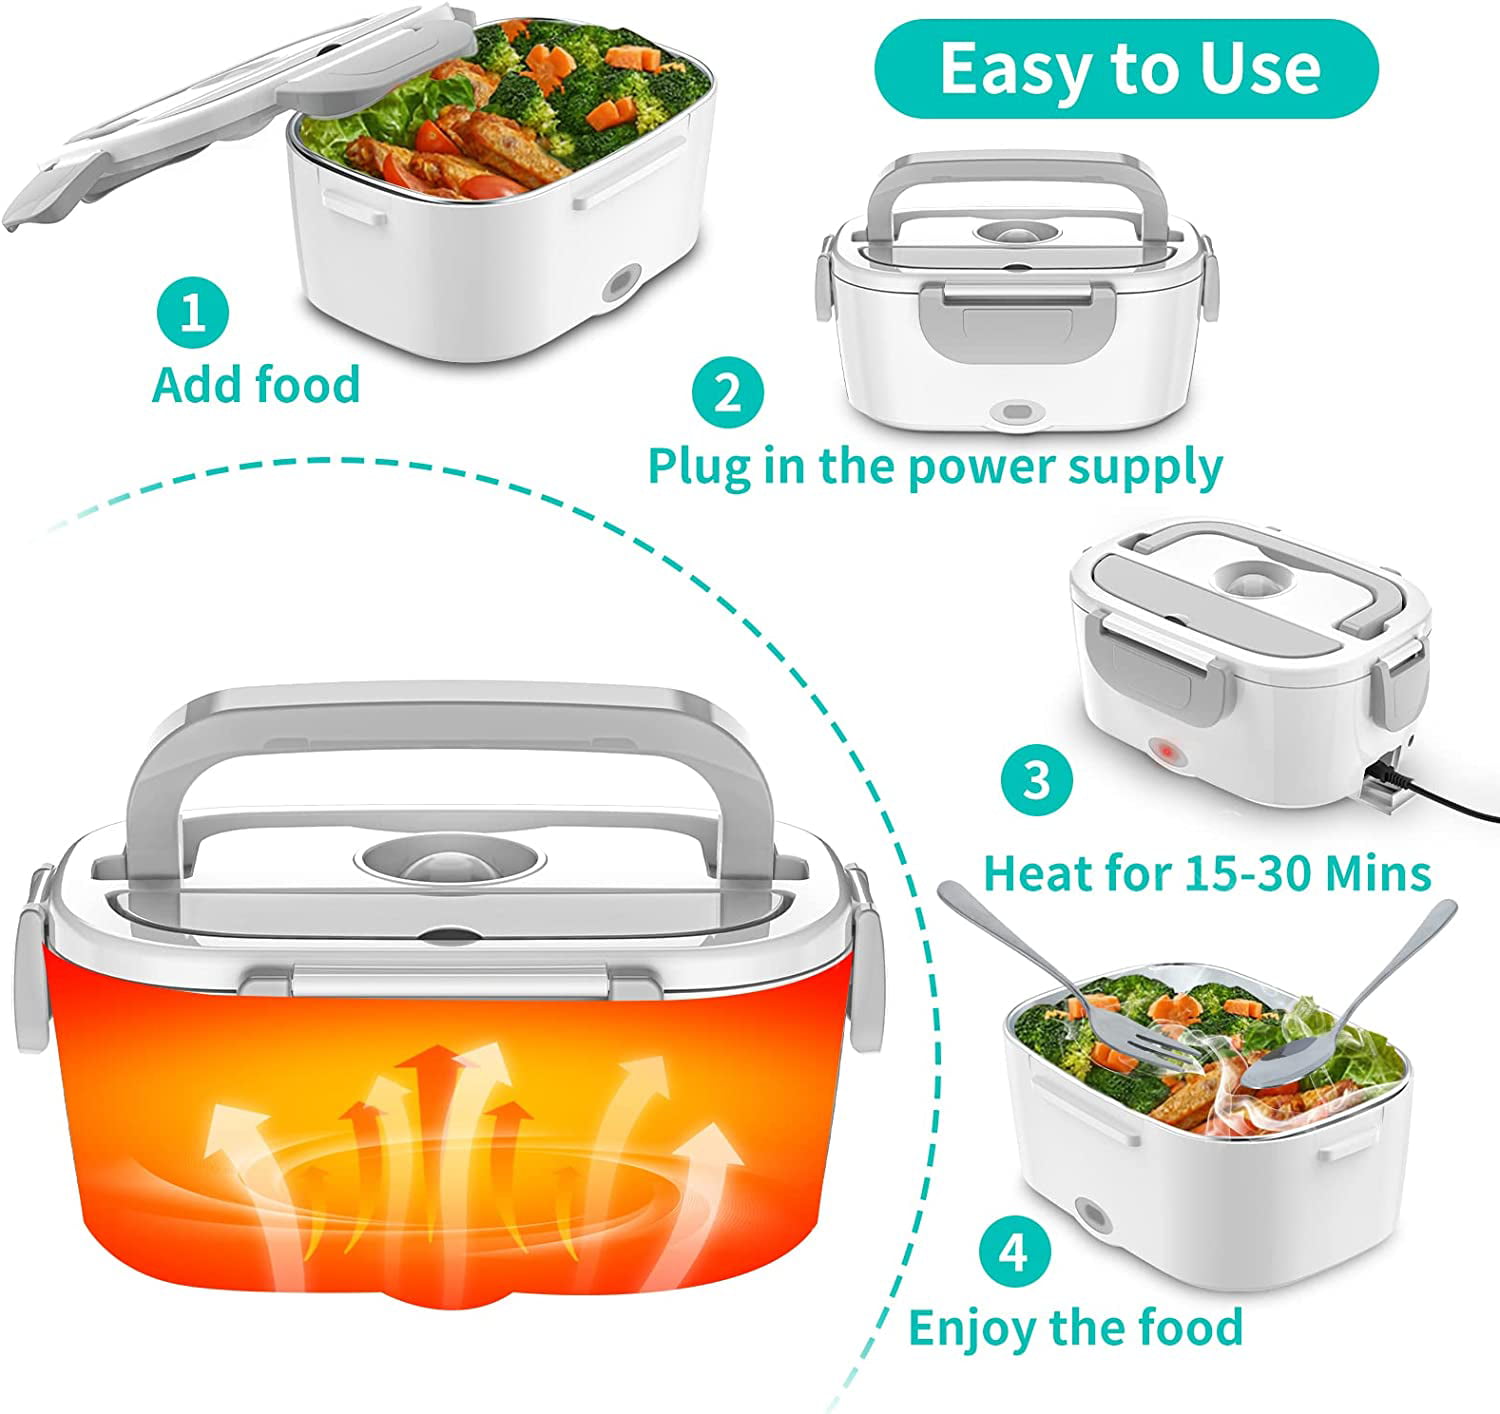 Reabulun Electric Lunch Box Food Heater review